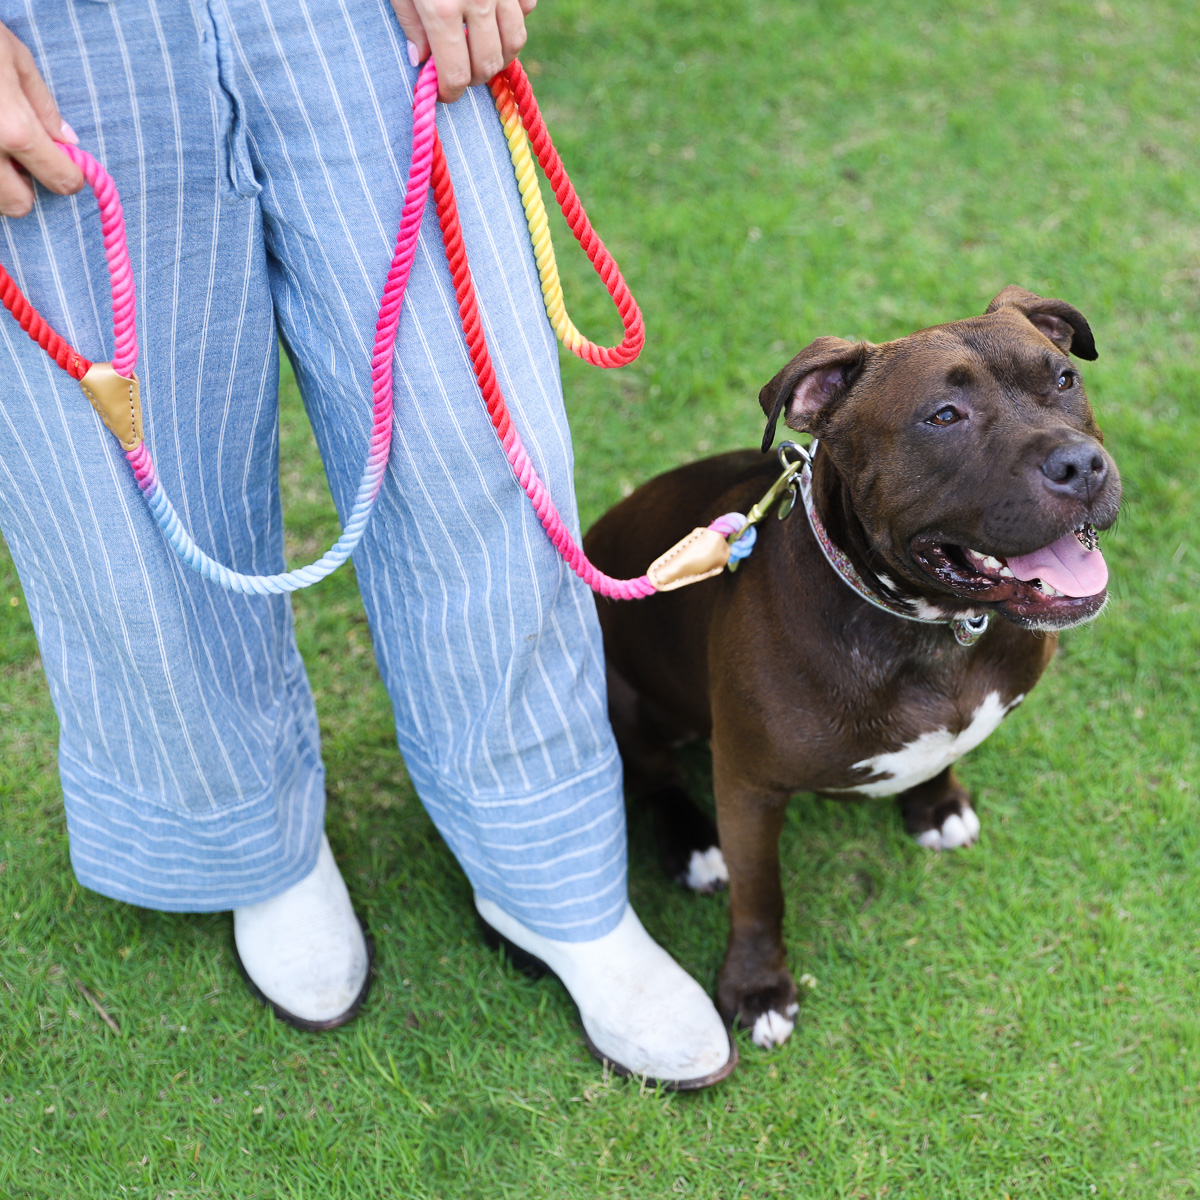 Packed Party Hold It! Rainbow Rope Dog Leash - image 4 of 8